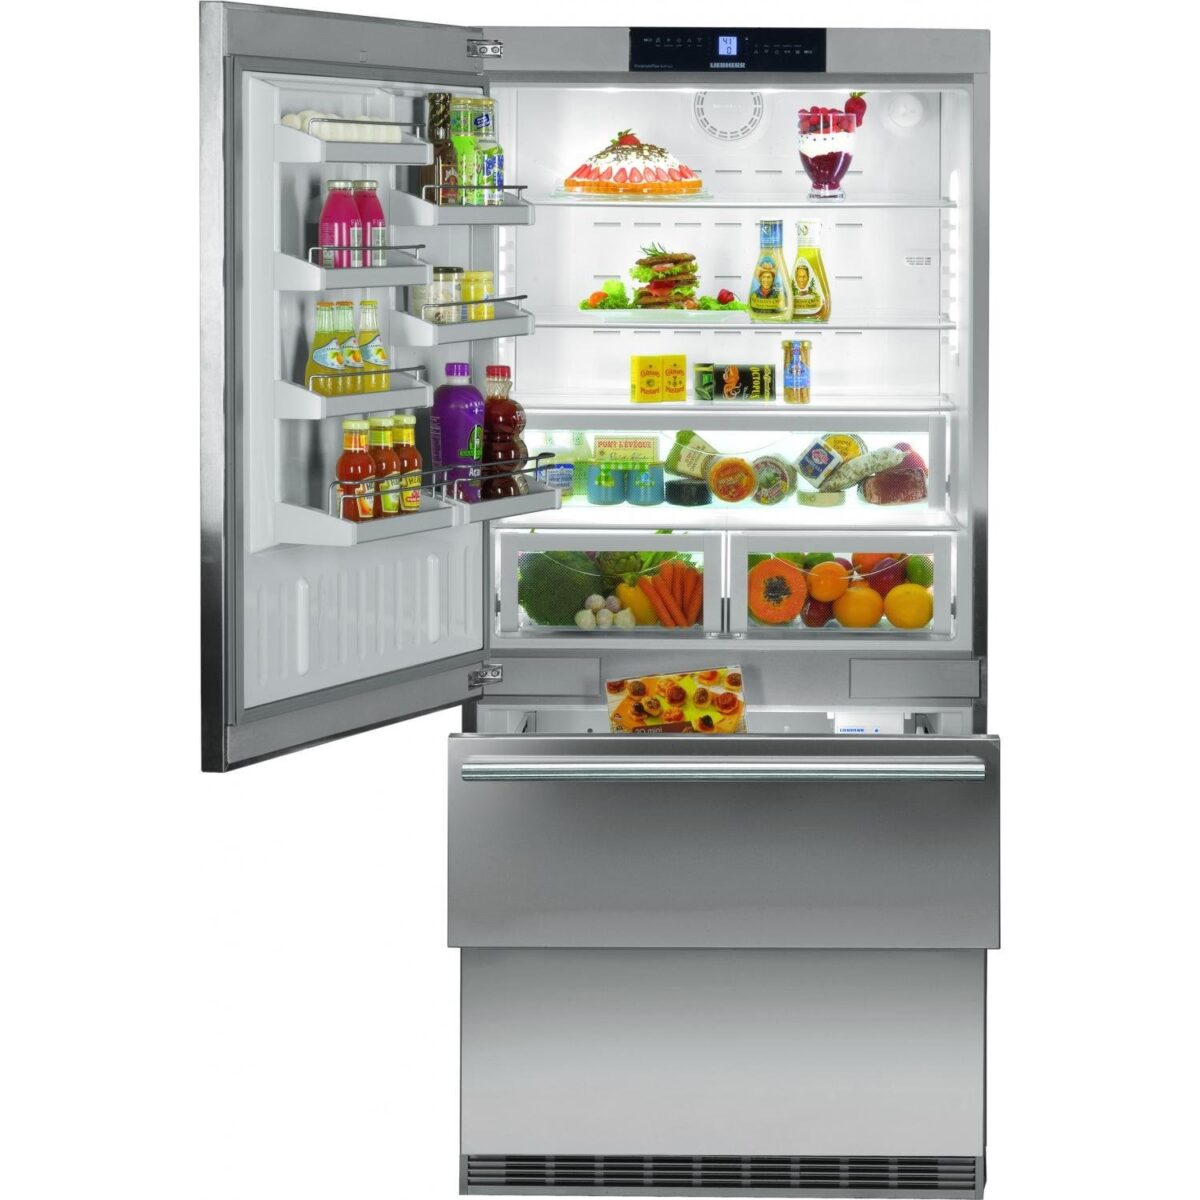 how to install a Whirlpool refrigerator